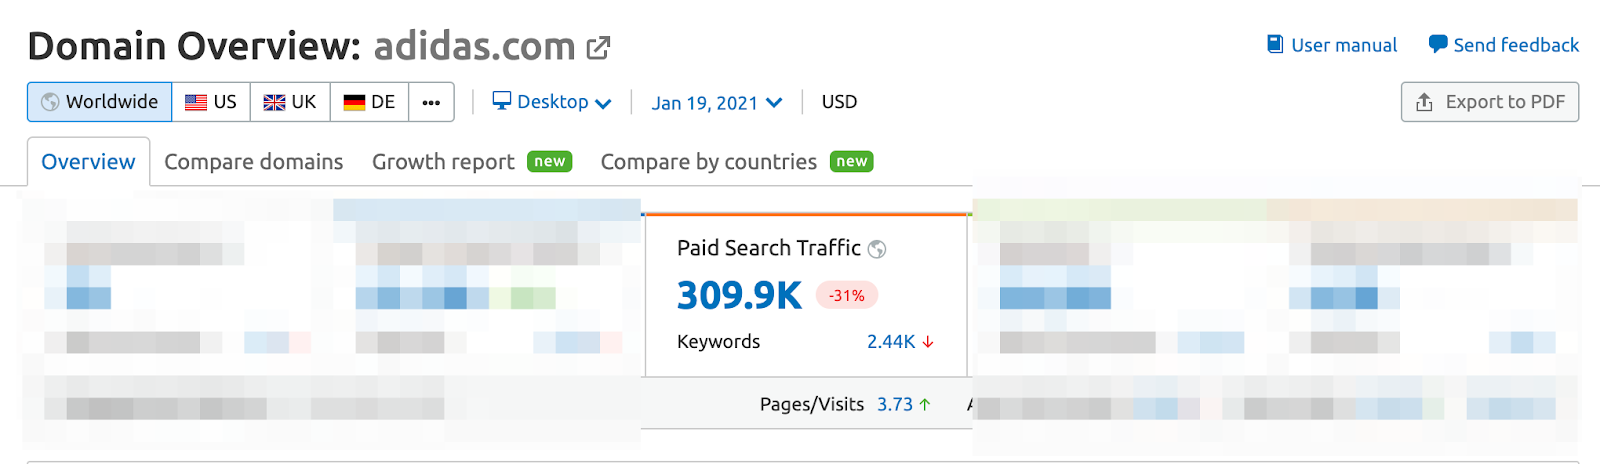 Semrush Domain Overview: Paid Search Traffic